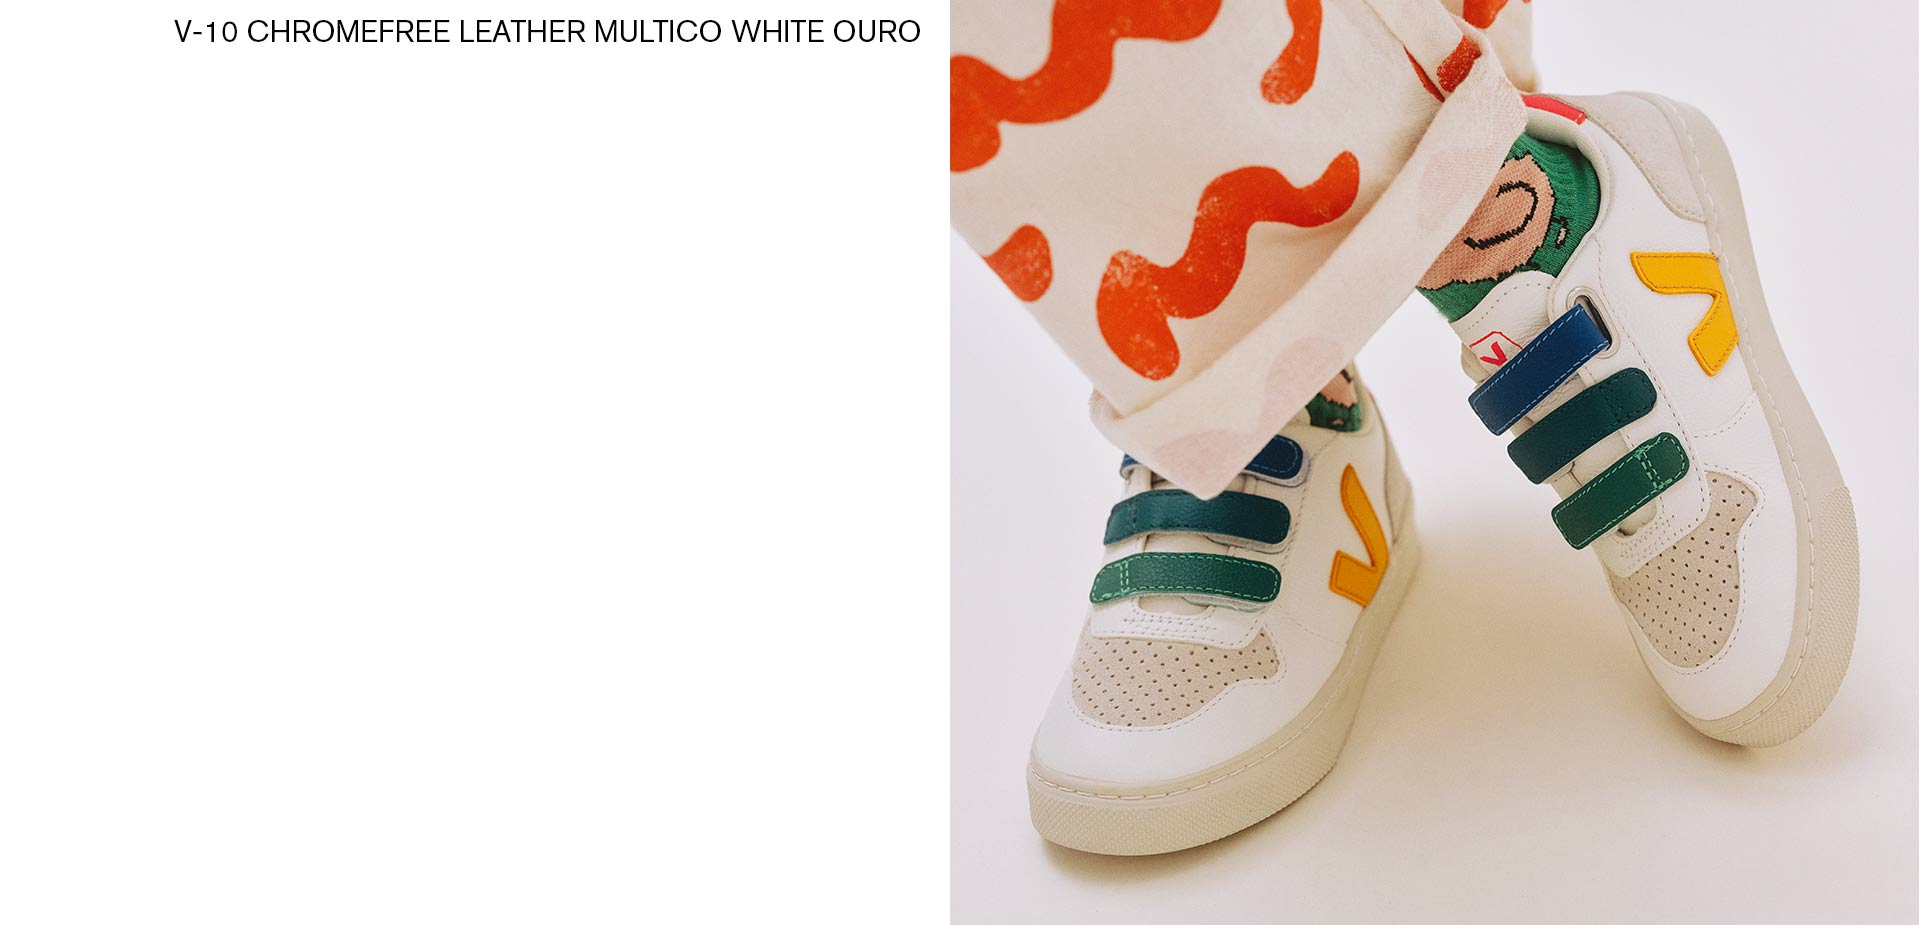 Focus on the feet of a child wearing V-10 chromefree multico white multico ouro trainers